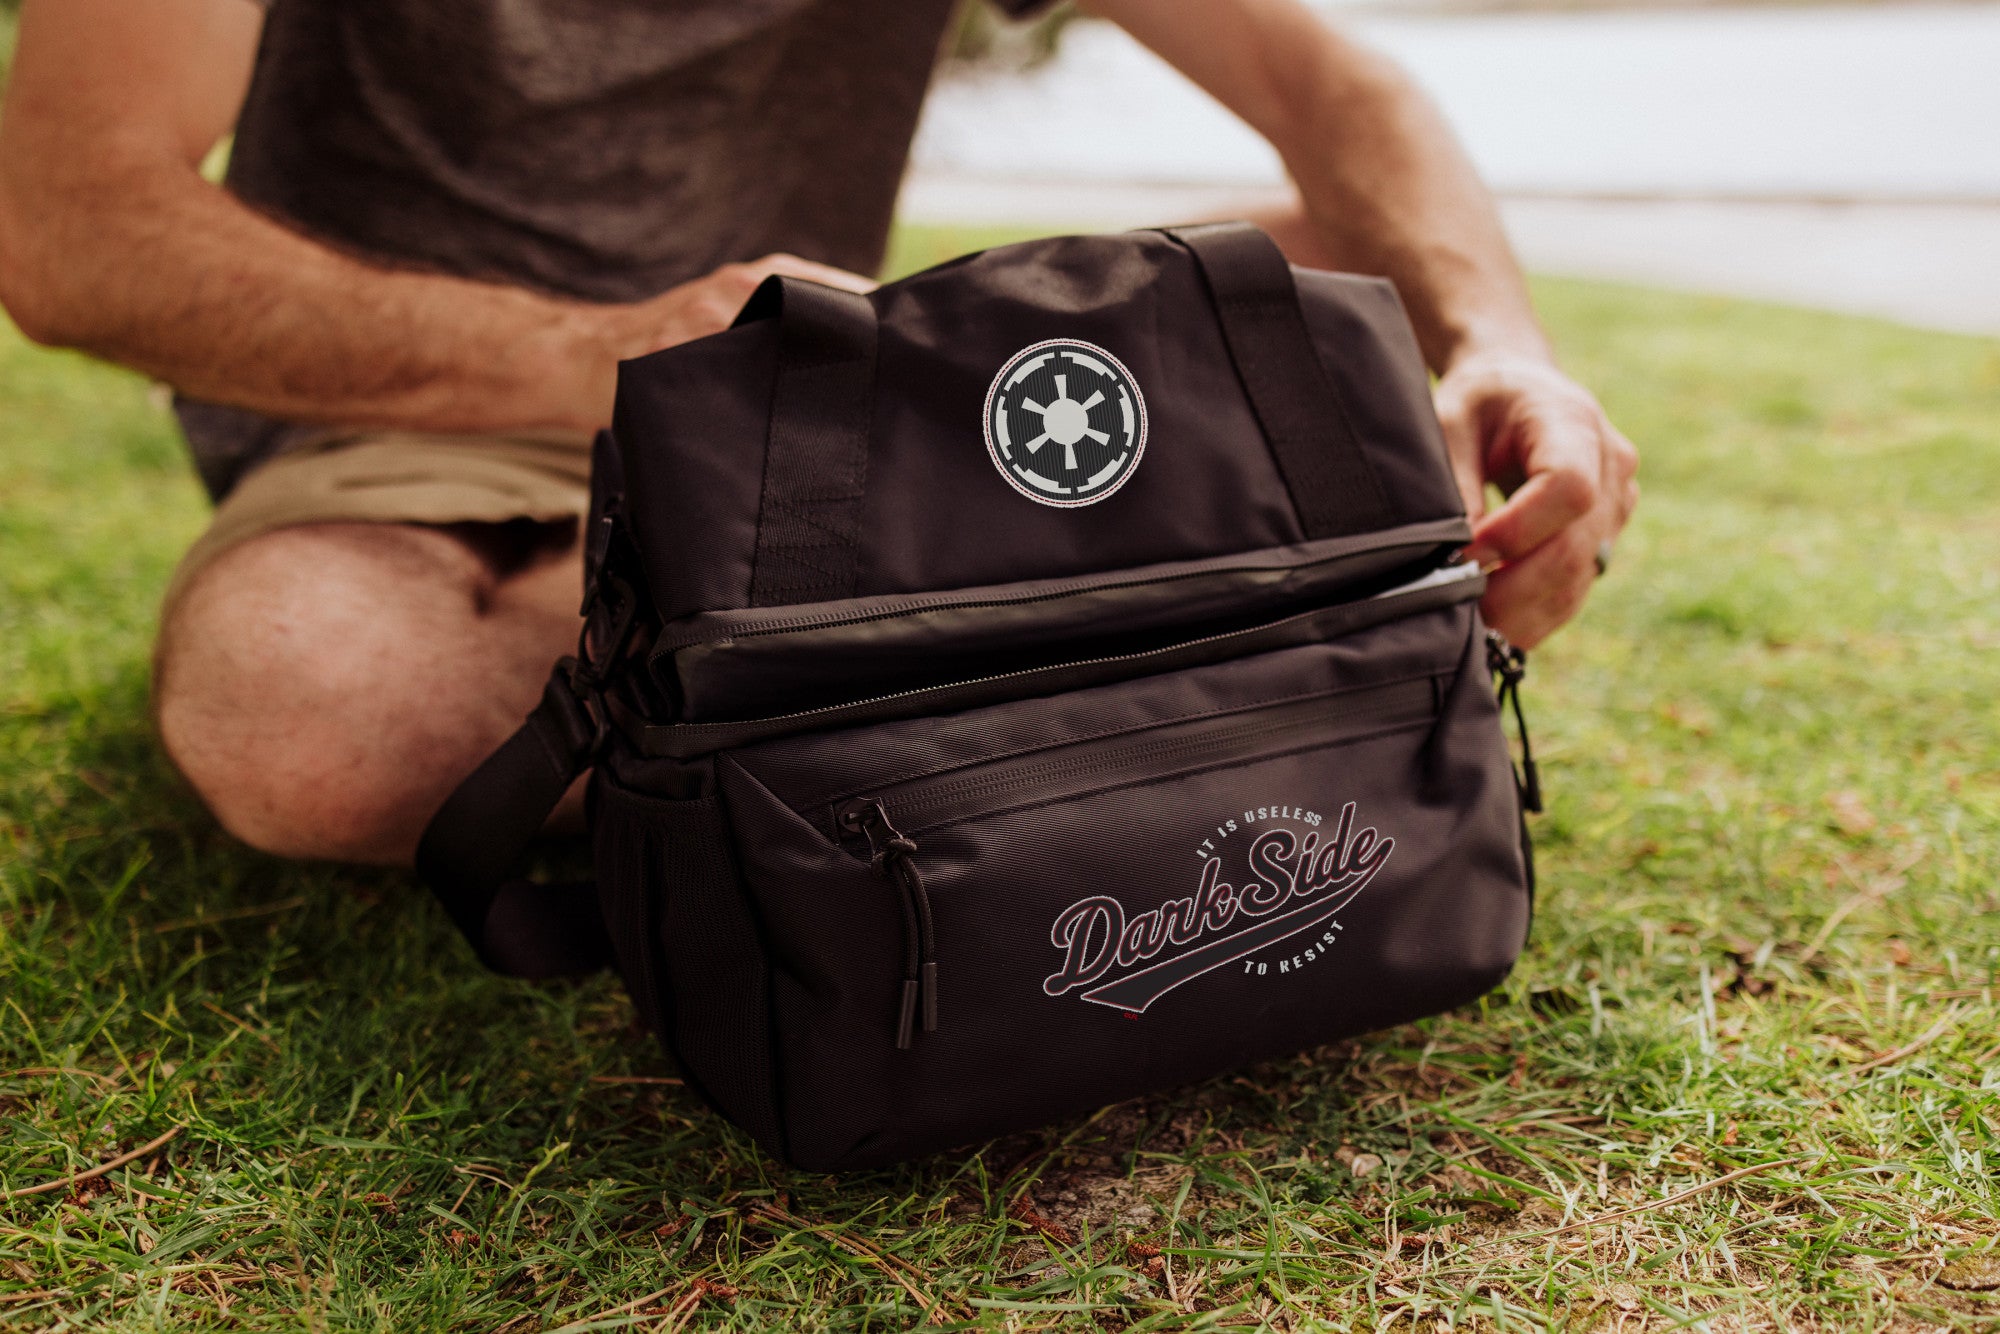 Star Wars Black Camo On The Go Lunch Cooler